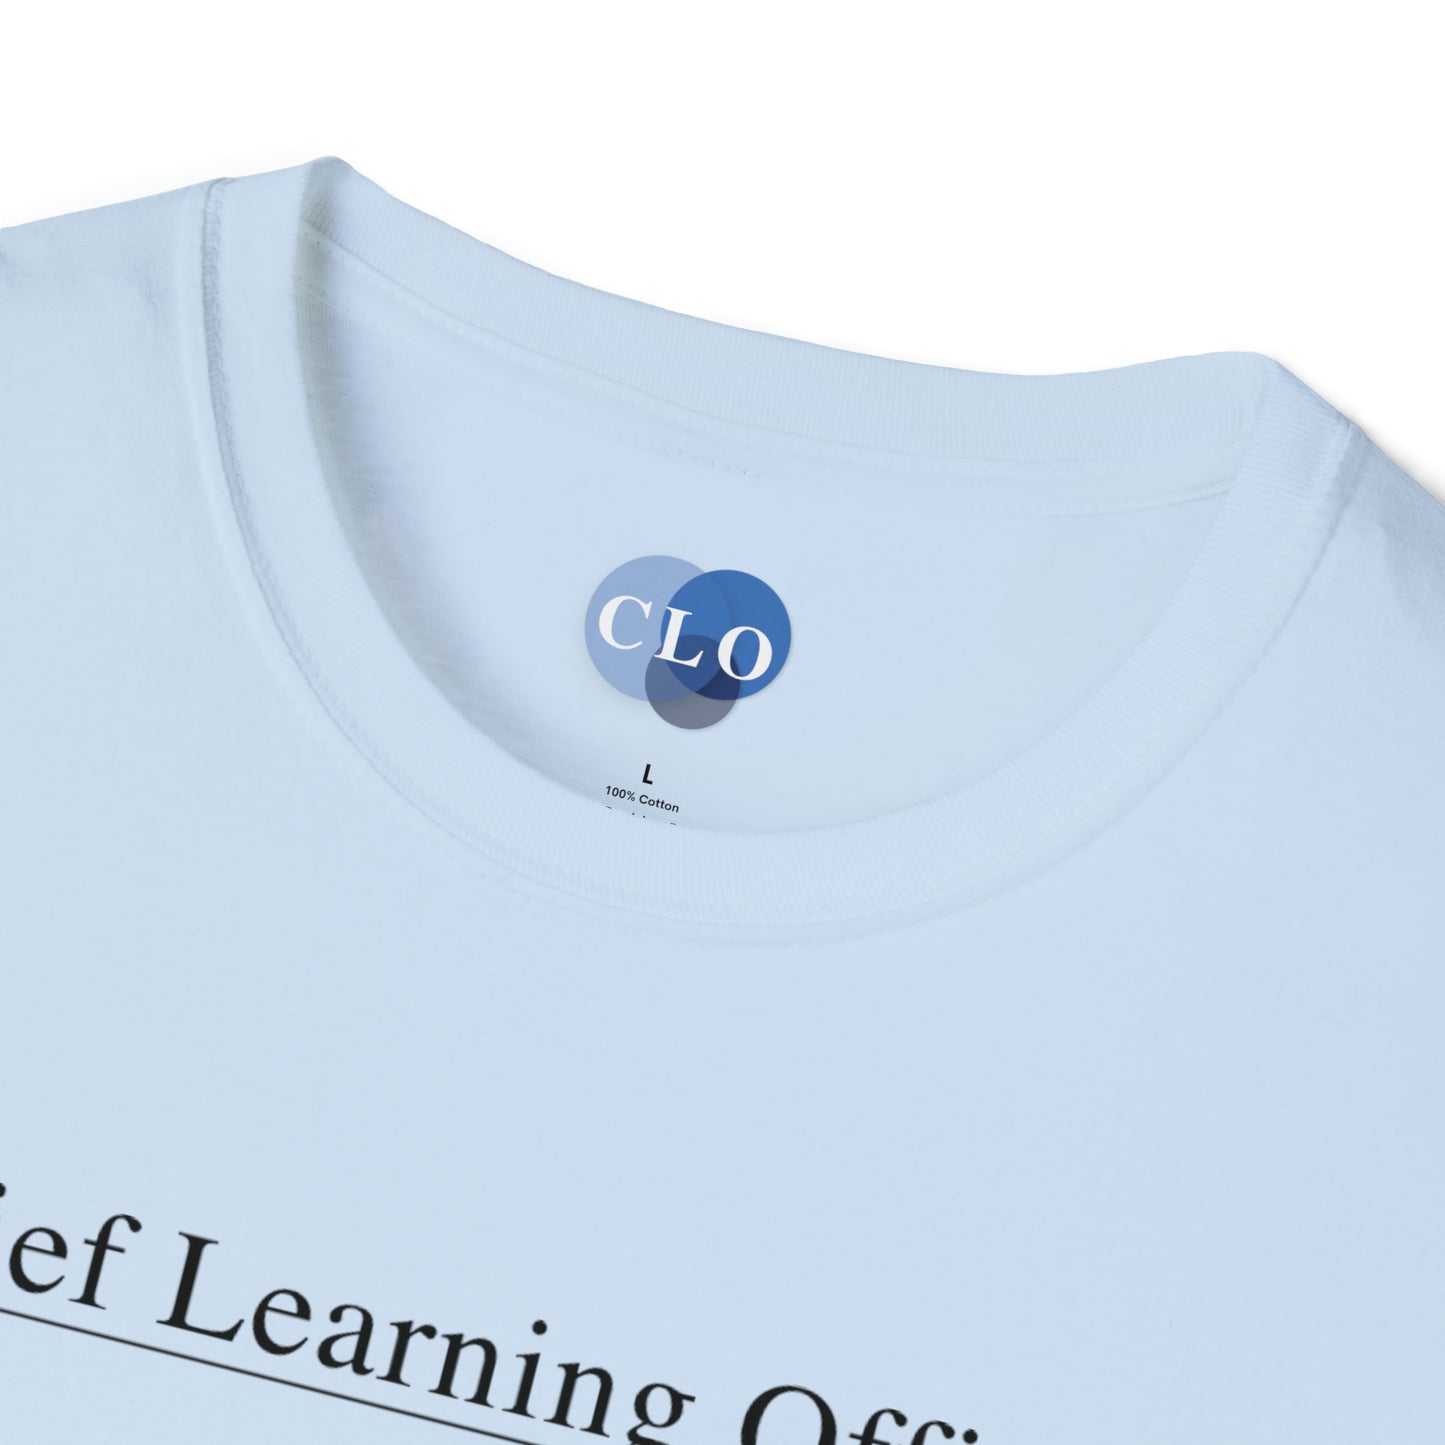 Chief Learning Officer Soft-style T-Shirt